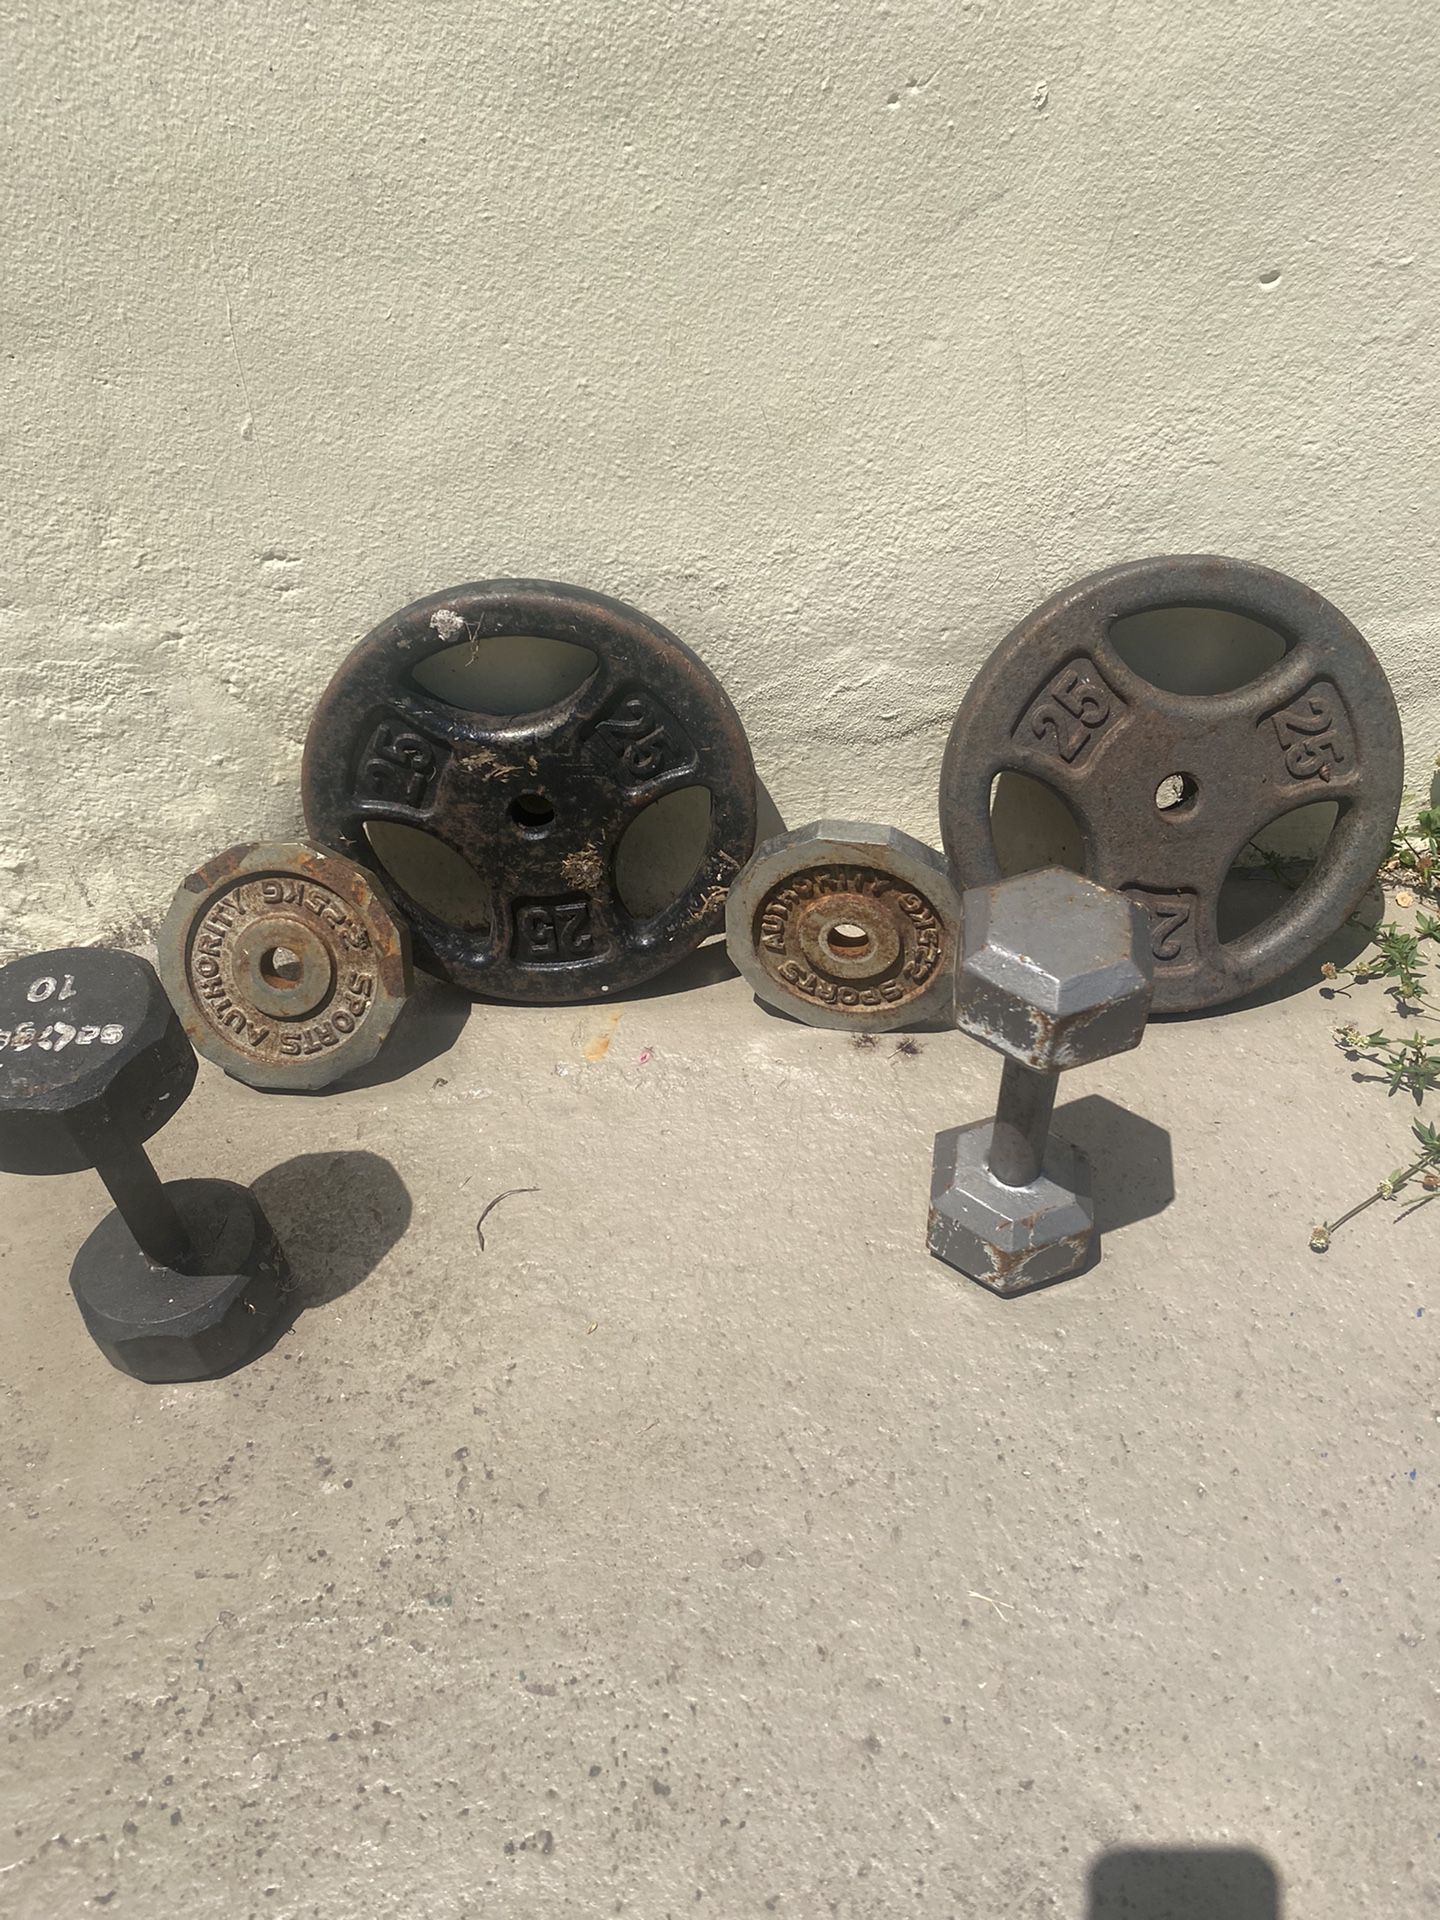 Workout Weights 